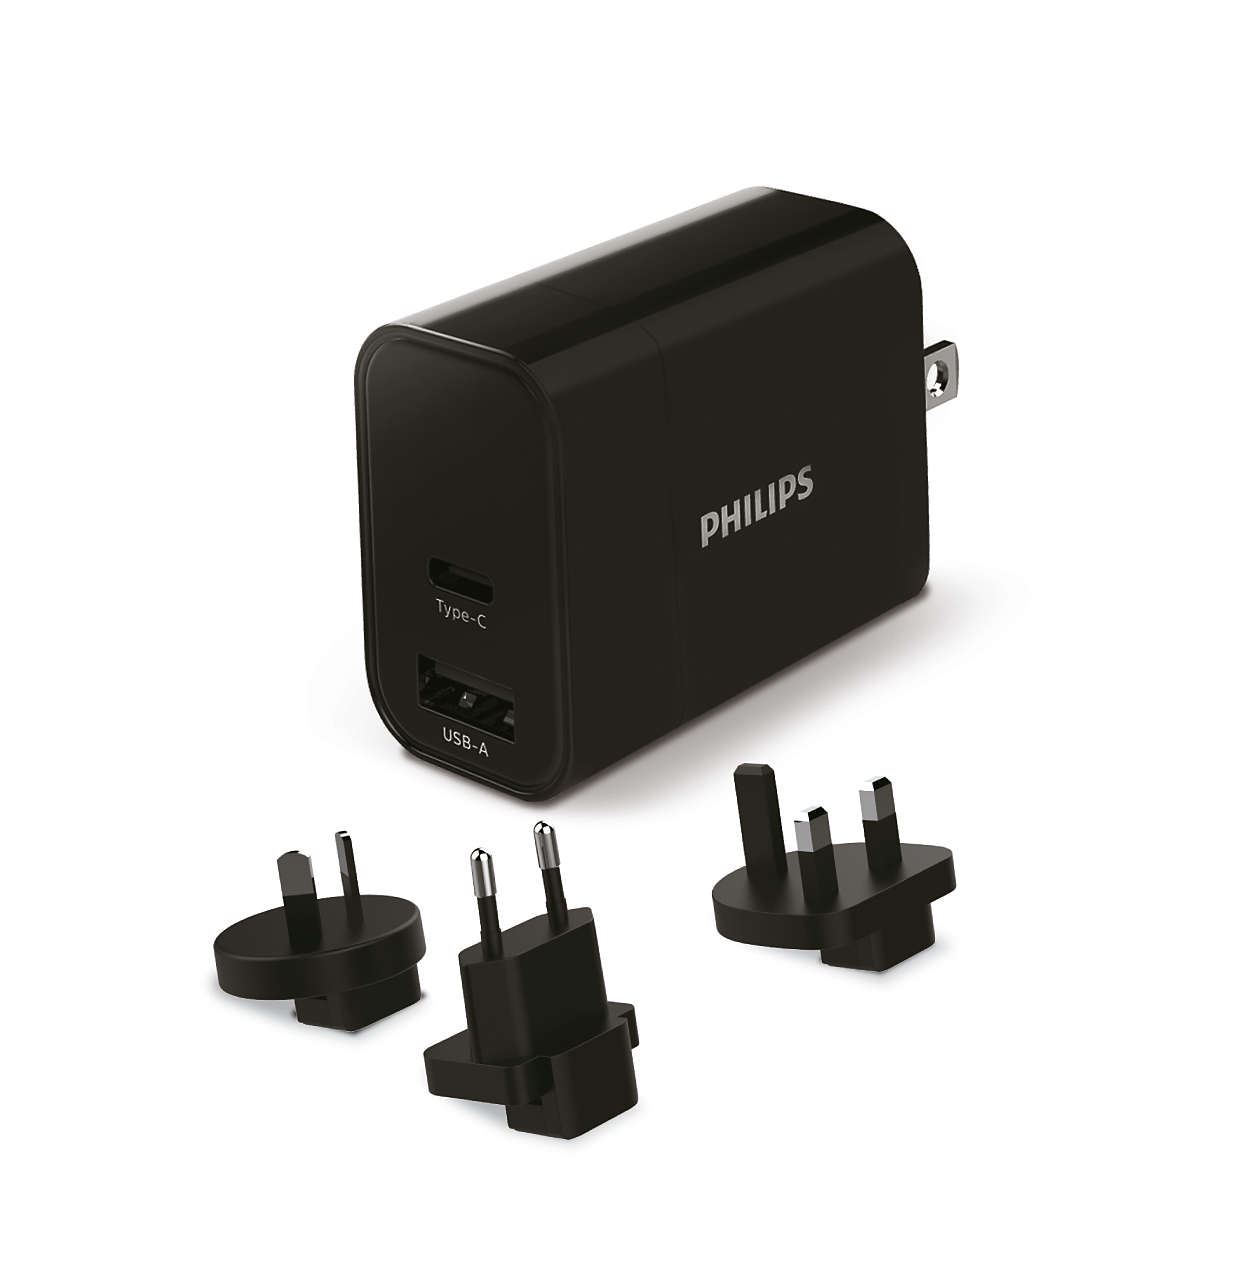 Travel wall charger with Type C and USB-A ports